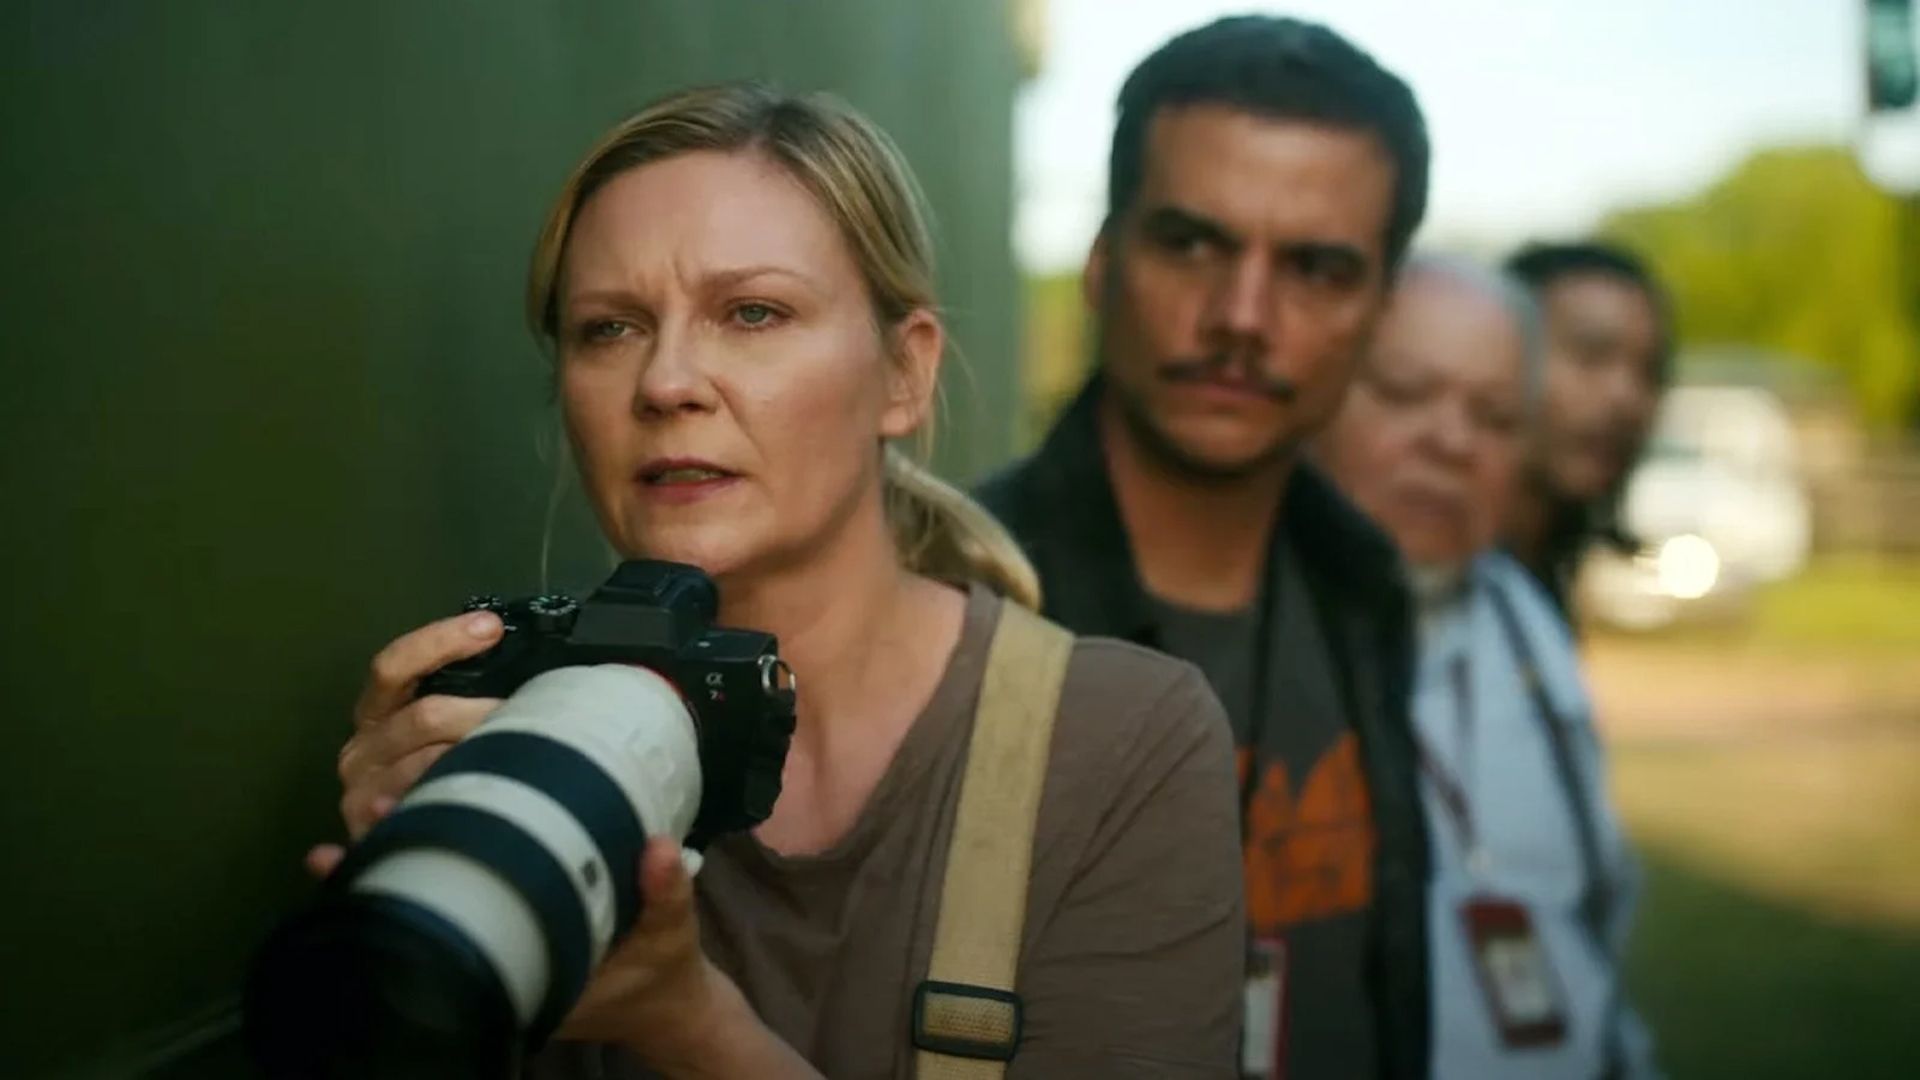 A woman is holding a camera in front of a group of people.